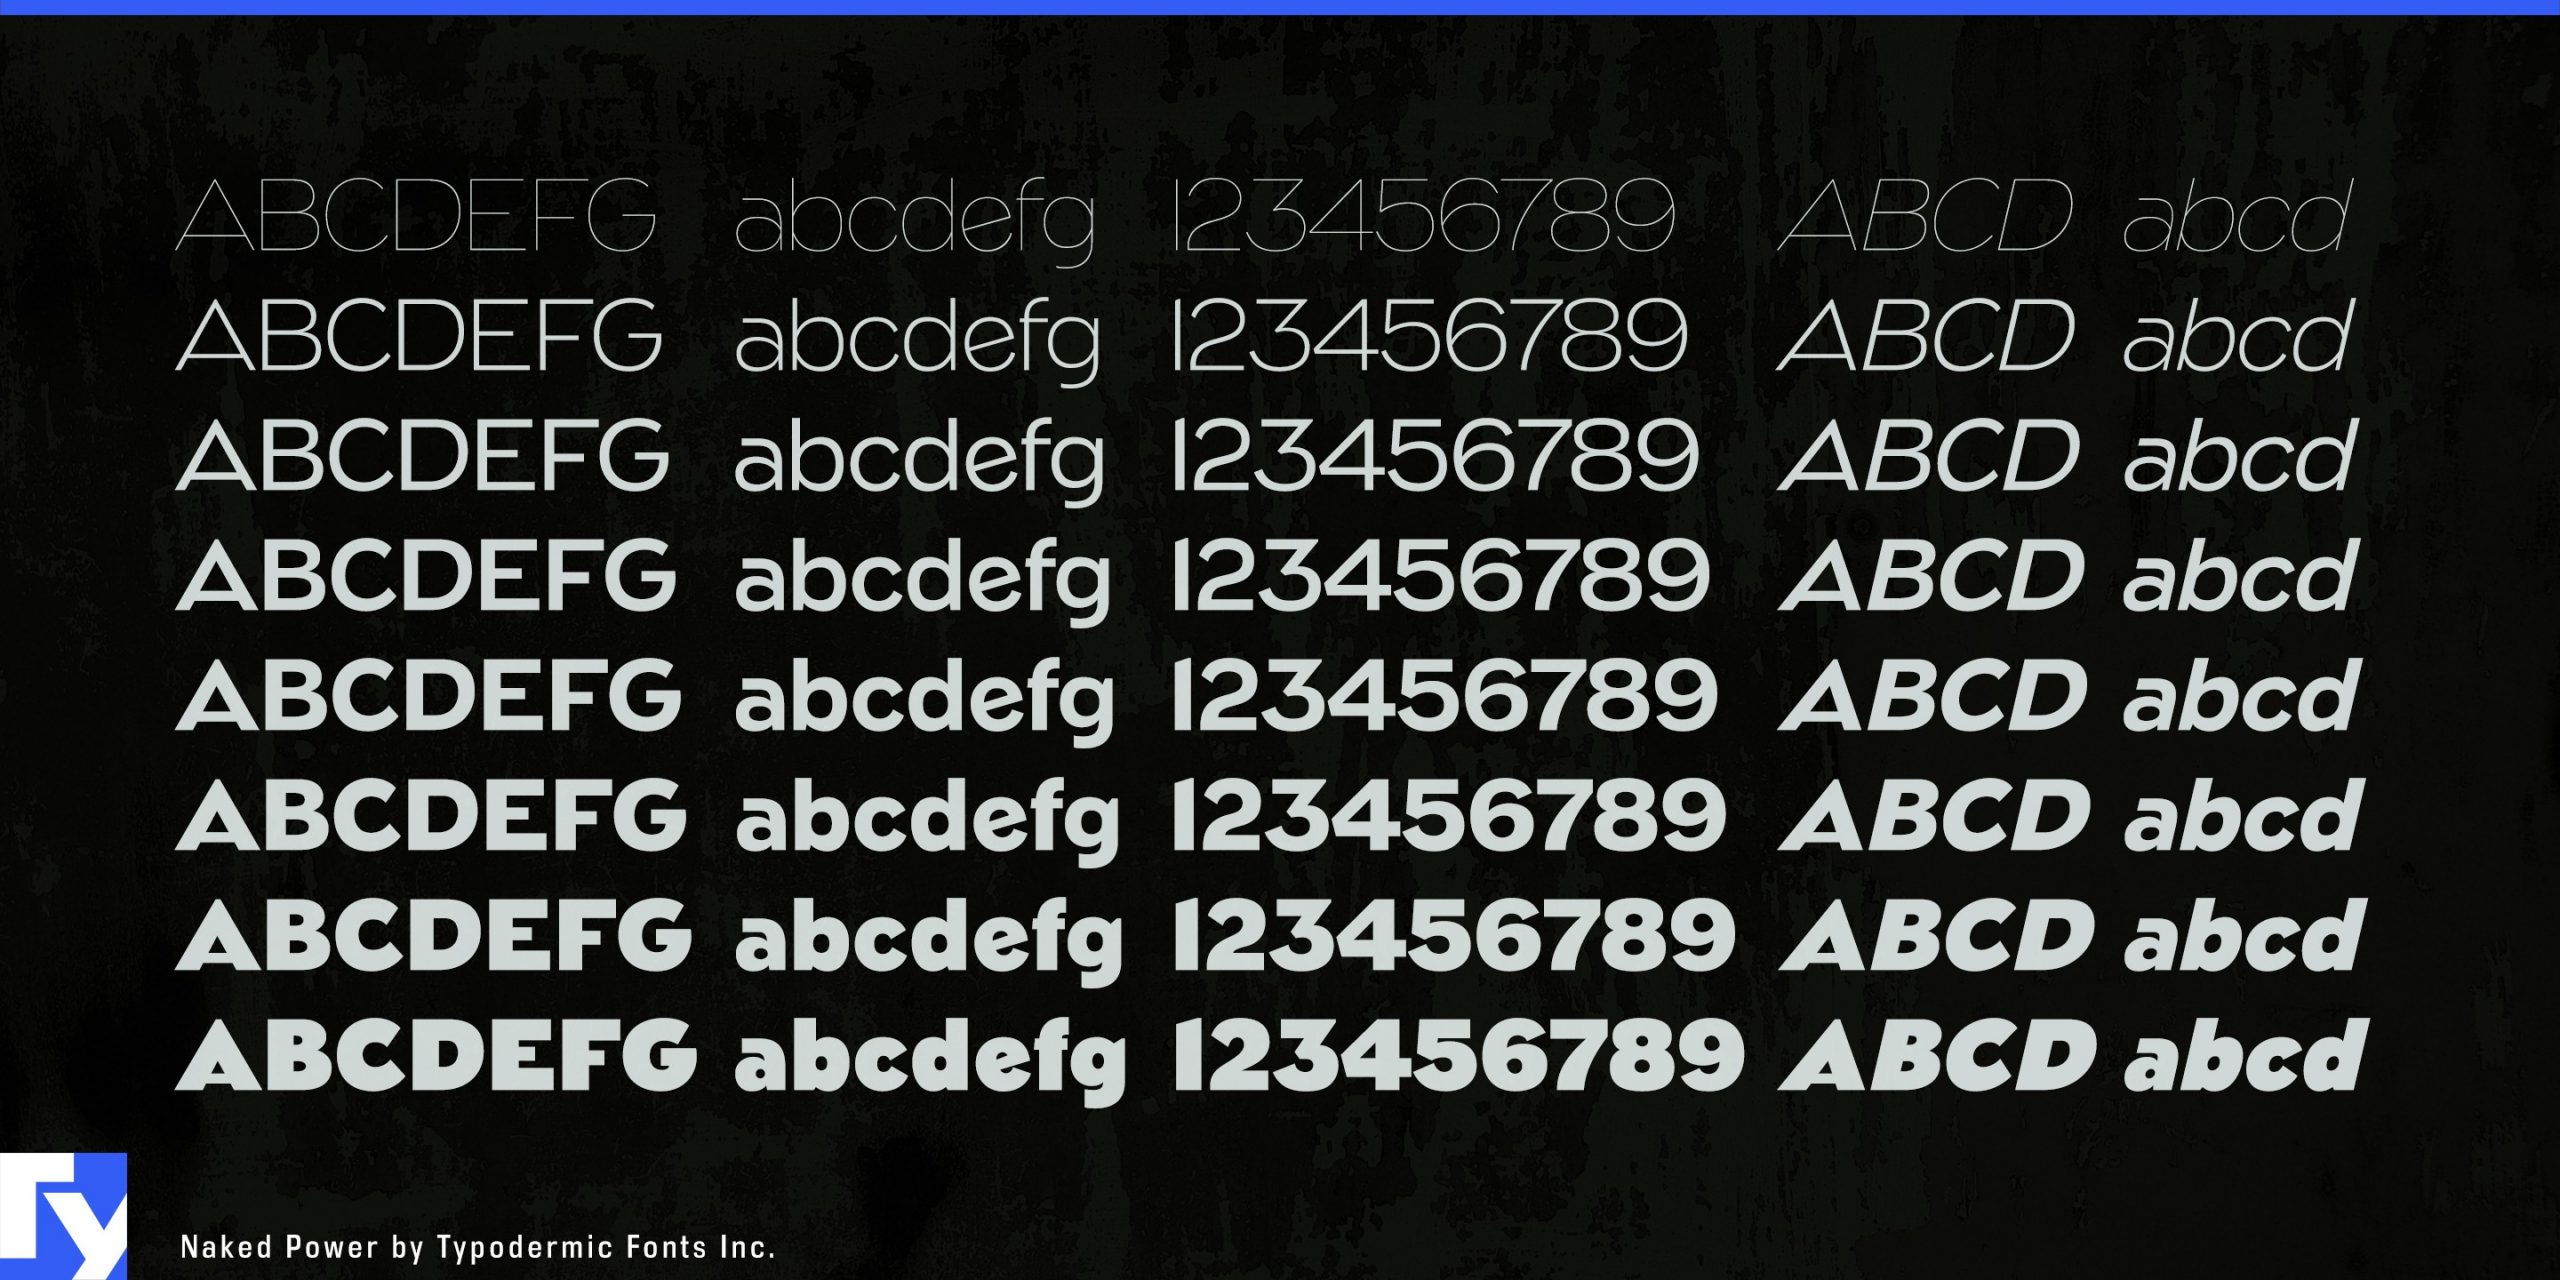 Versatility Personified: Explore the Eight Weights of Naked Power Typeface